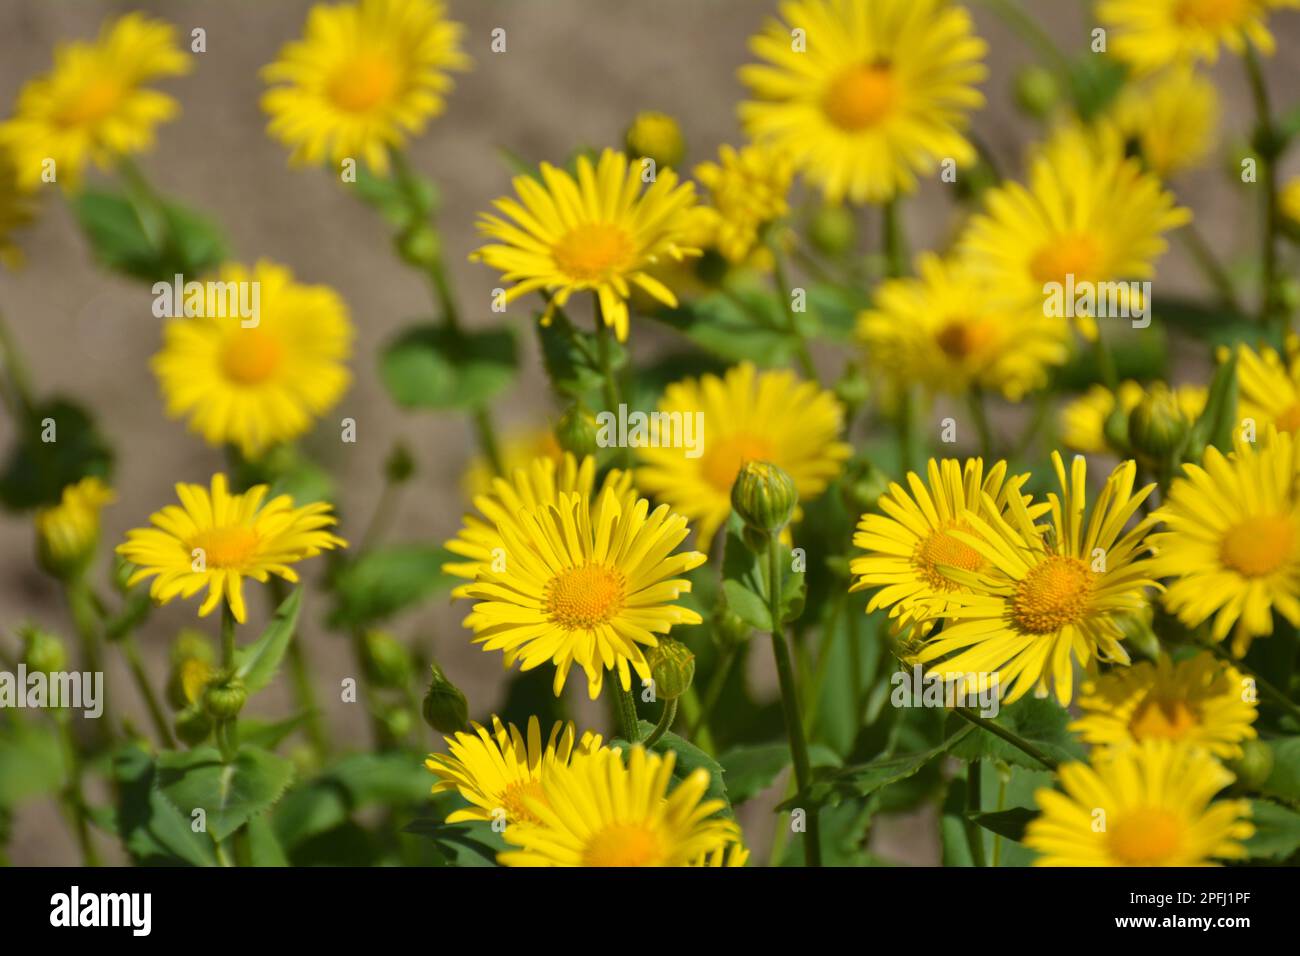 Doronicum orientale blooms on a flower bed in the garden Stock Photo